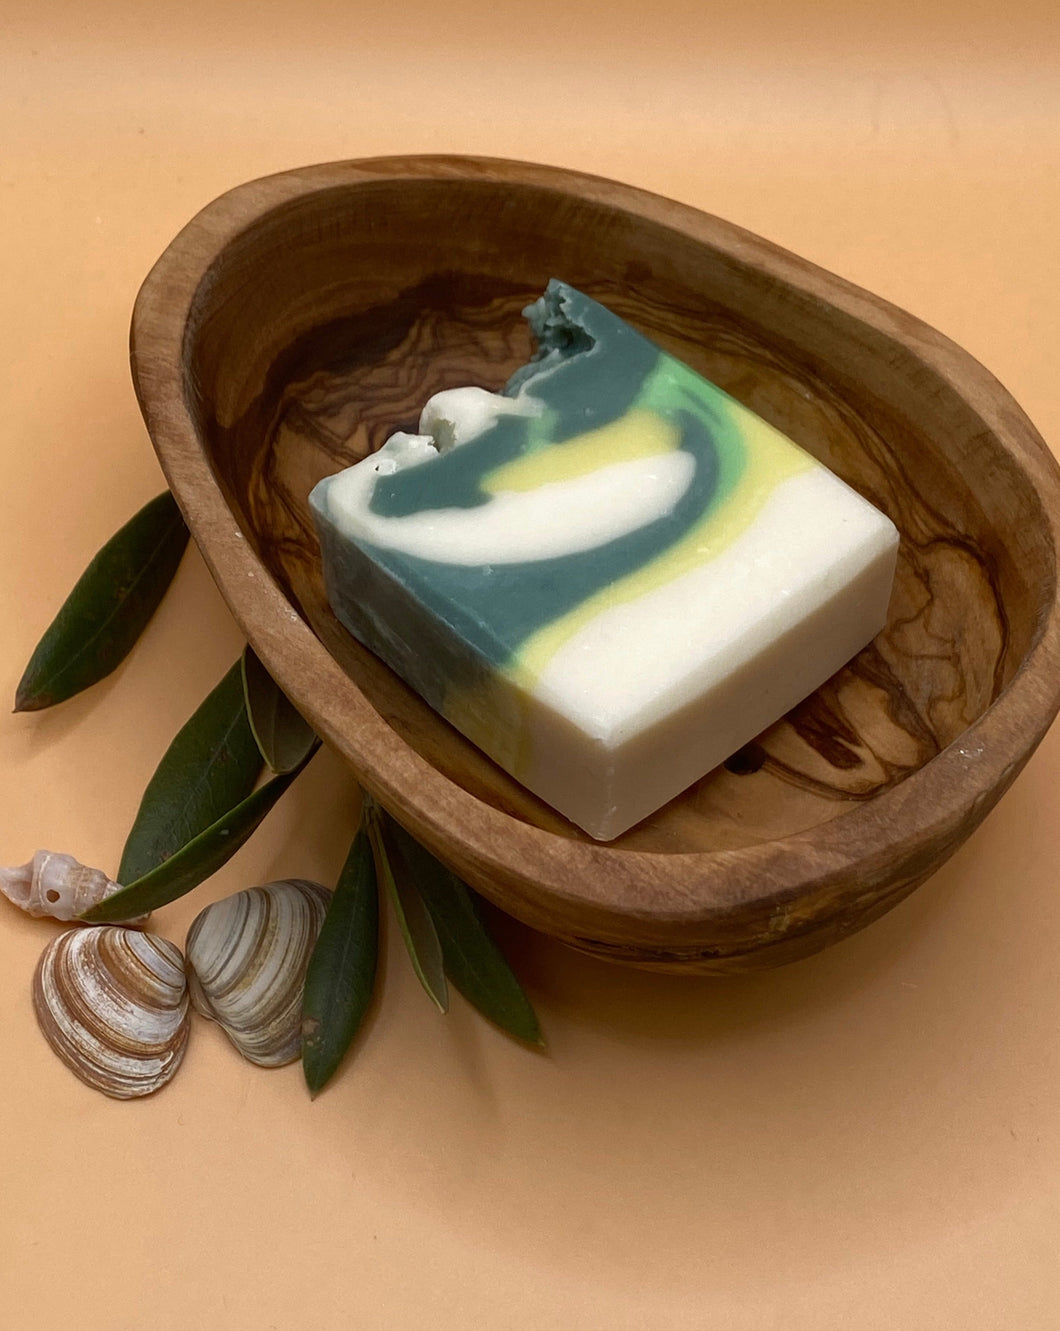 Olive wood soap dish with an artisan handmade soap Ginkgo Limette. Stylish, thoughful and beautiful. Natural. Perfect gift set for yourself or someone special. Environmentally friendly. Unique.